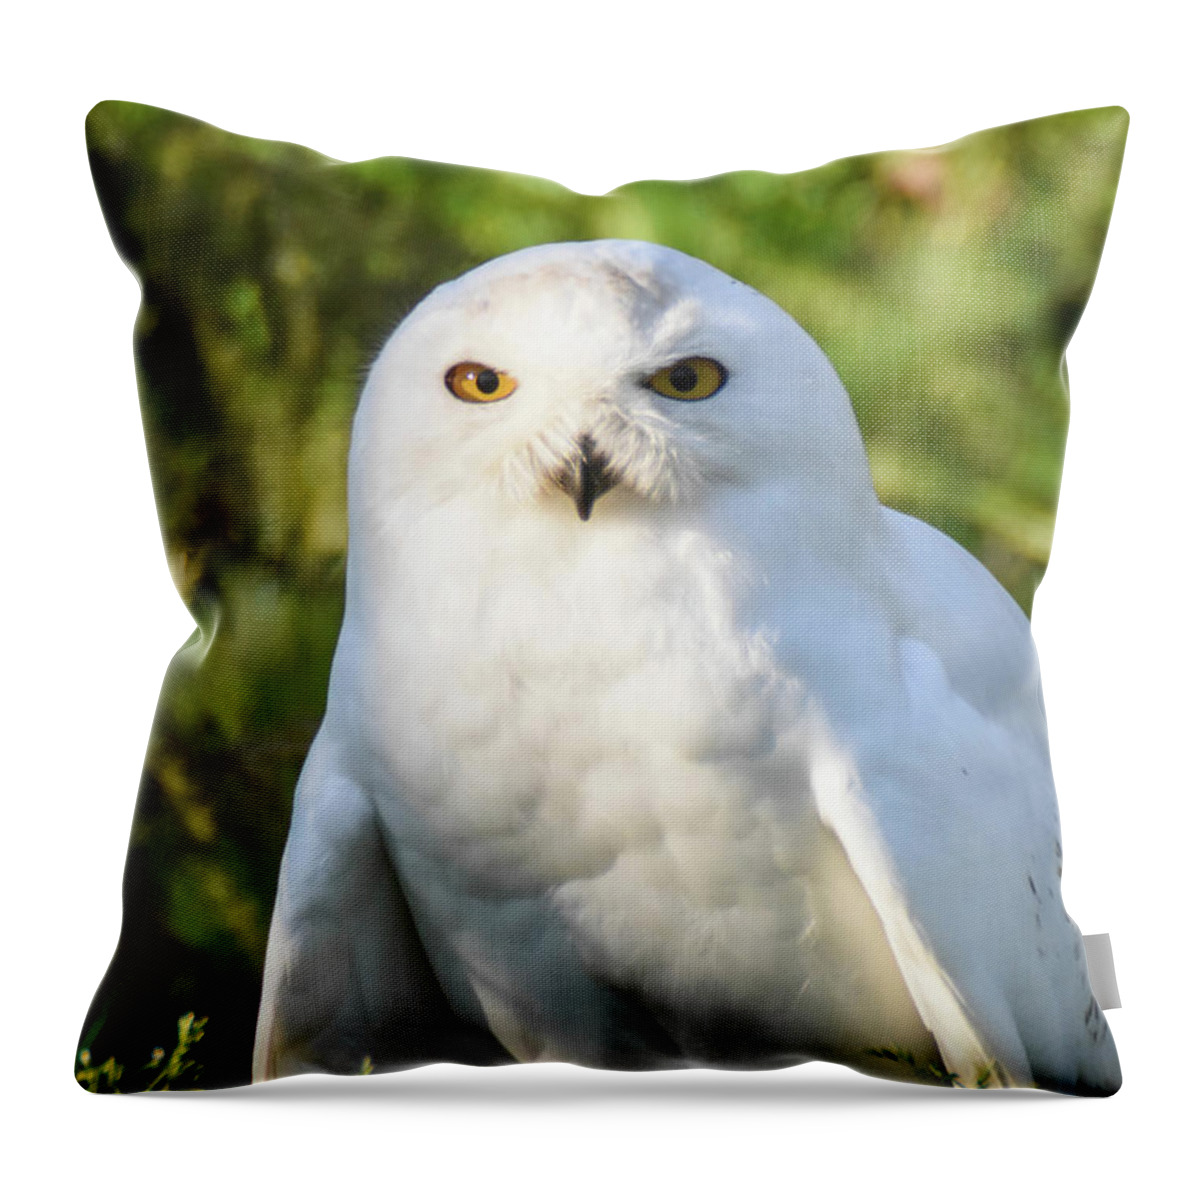 Bird Throw Pillow featuring the photograph Snowy Owl by Ed Stokes